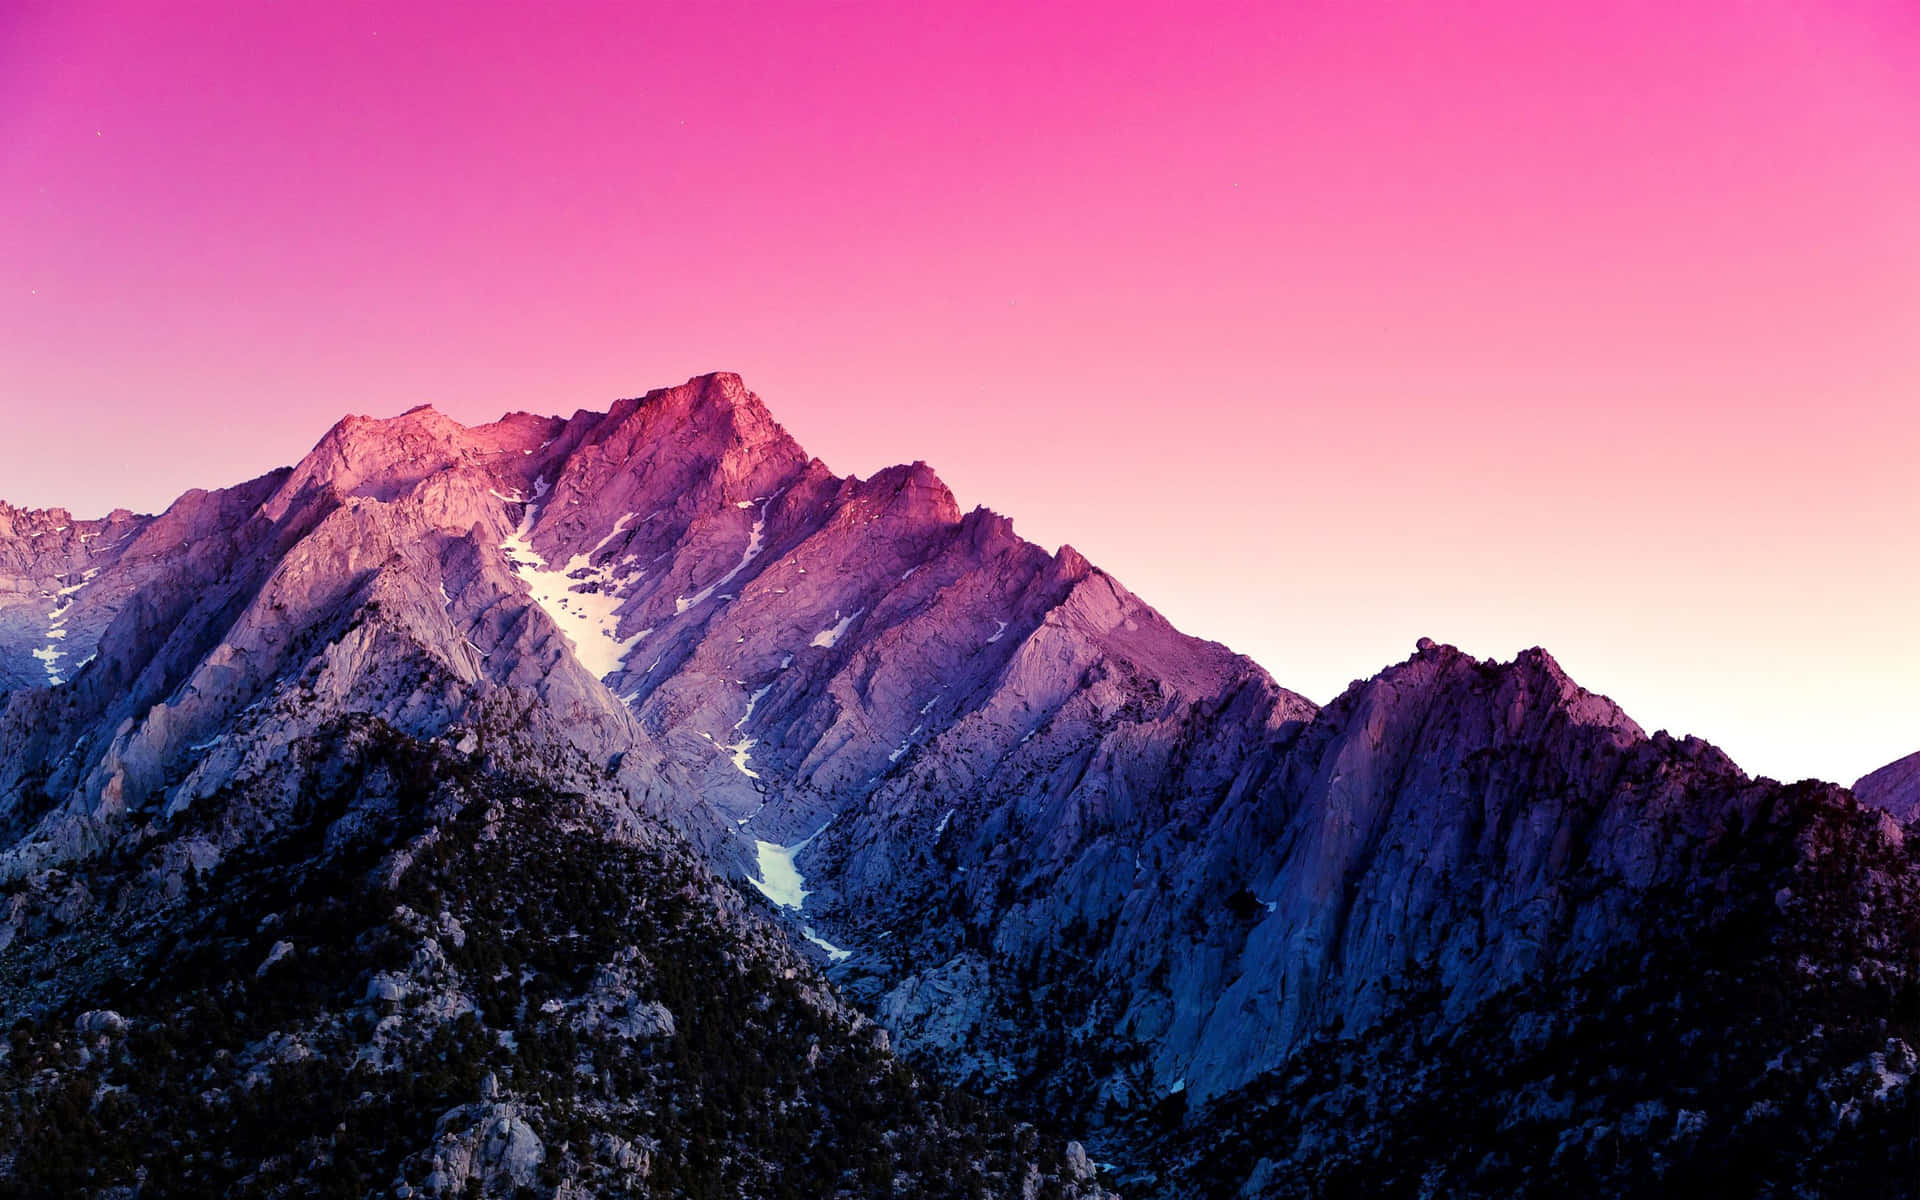 A breathtaking view of snow-capped mountains at sunrise